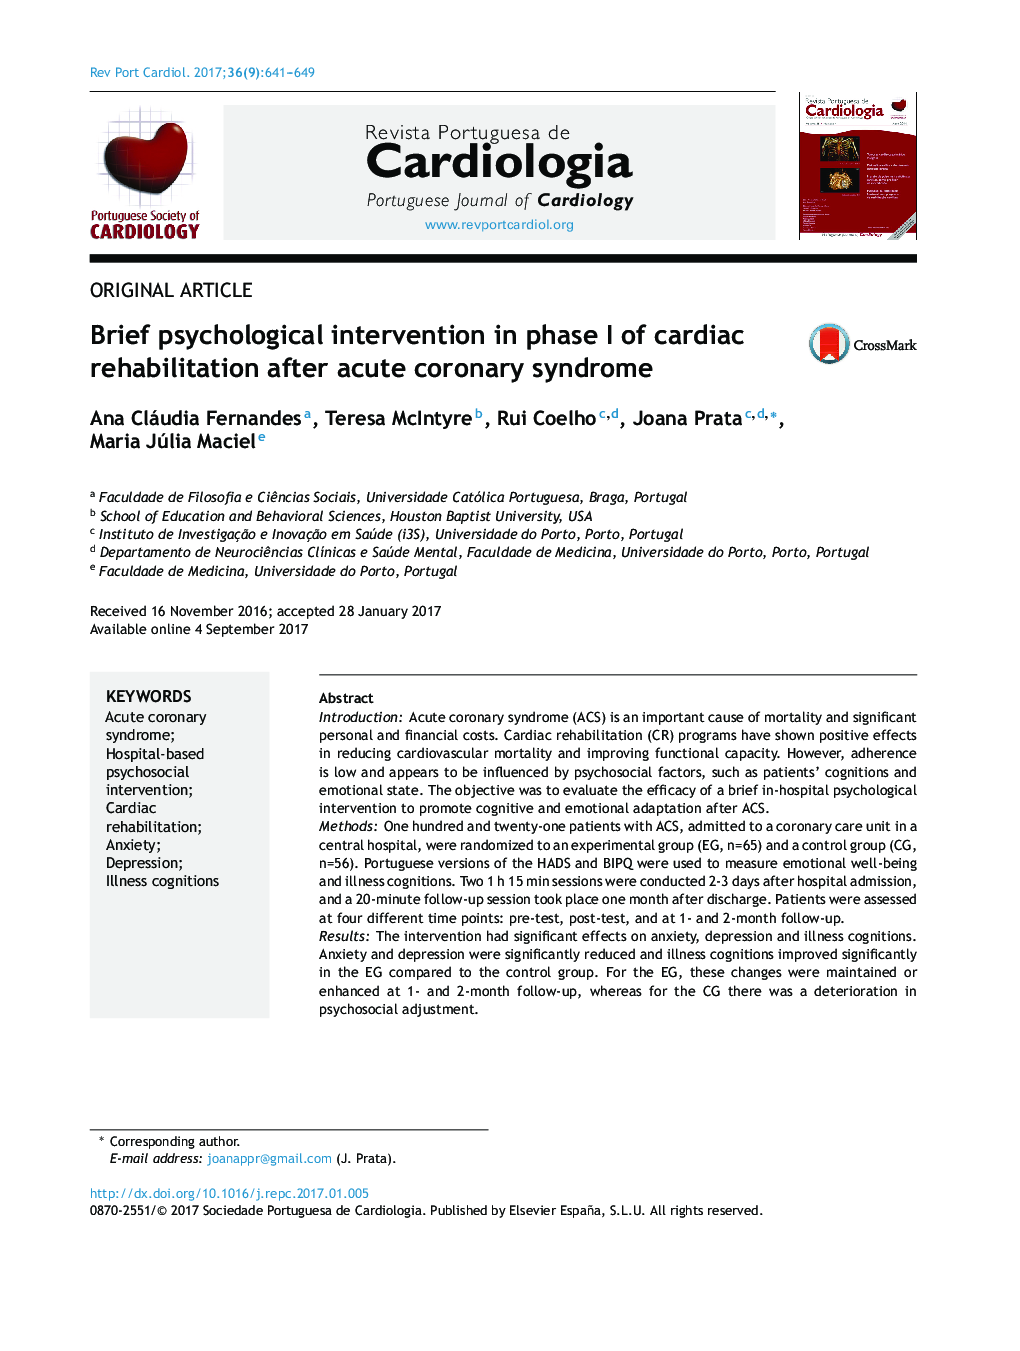 Brief psychological intervention in phase I of cardiac rehabilitation after acute coronary syndrome